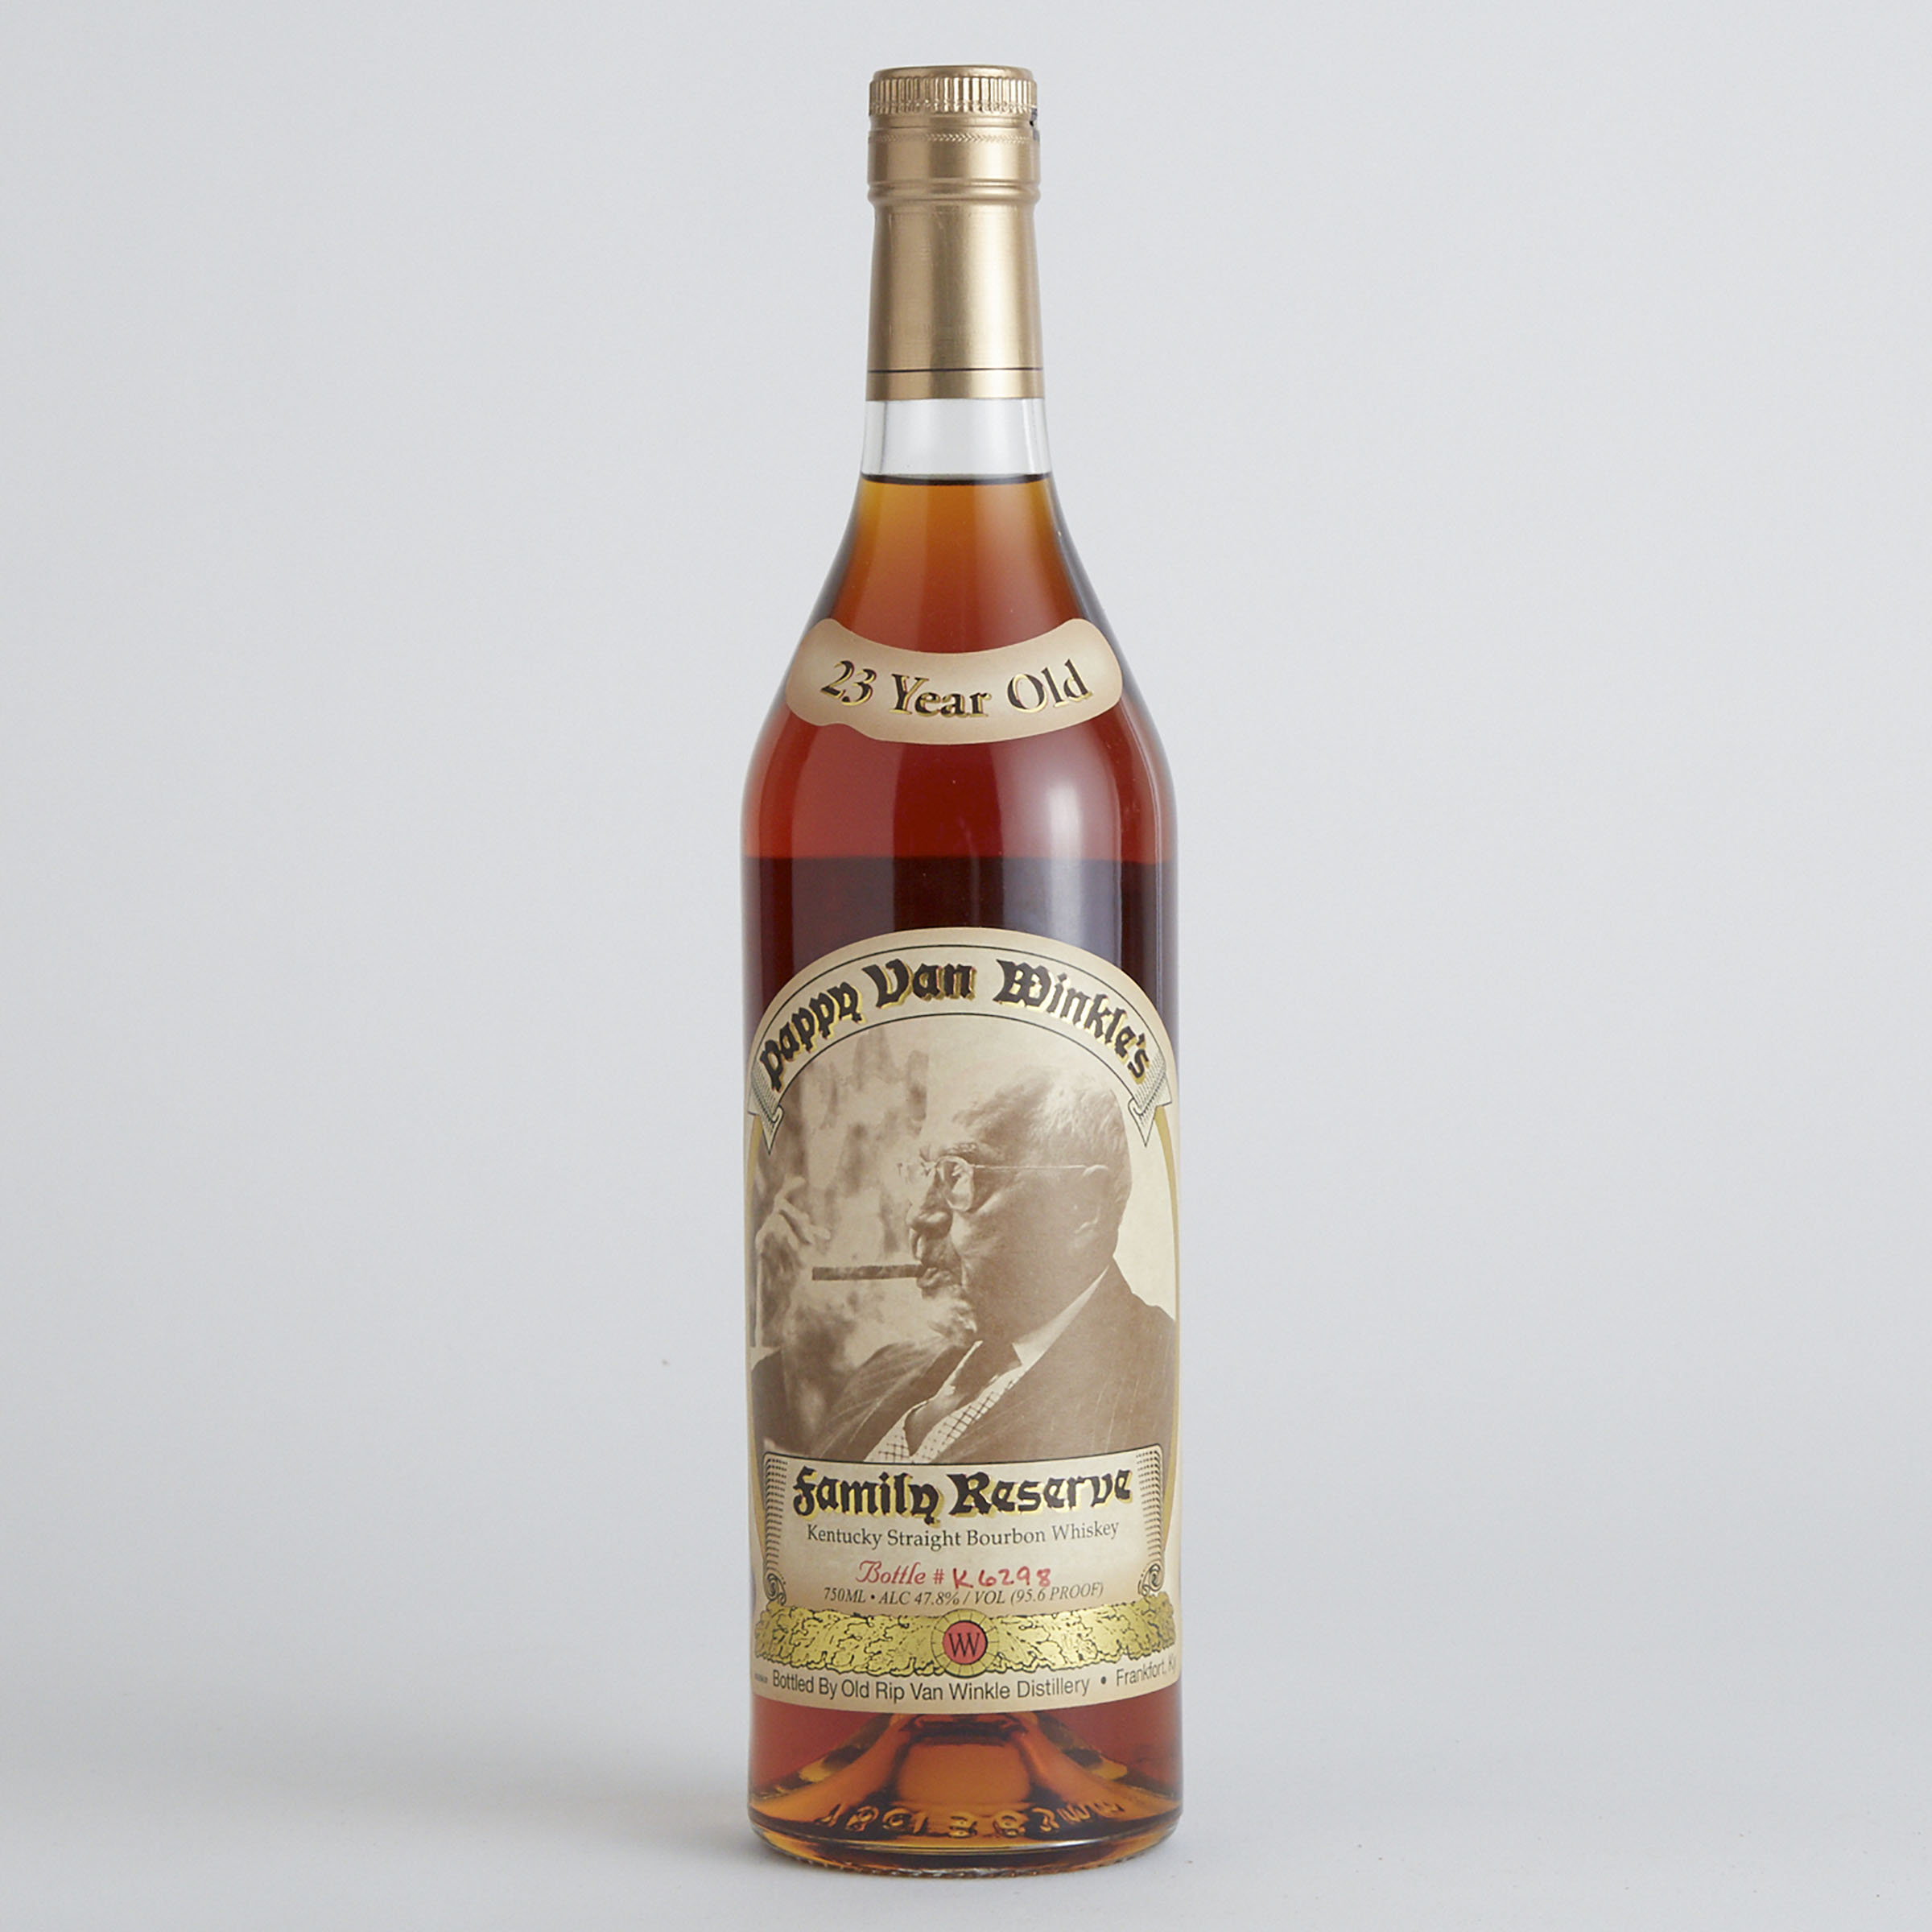 PAPPY VAN WINKLE FAMILY RESERVE KENTUCKY STRAIGHT BOURBON WHISKEY 23 YEARS (ONE 750 ML)